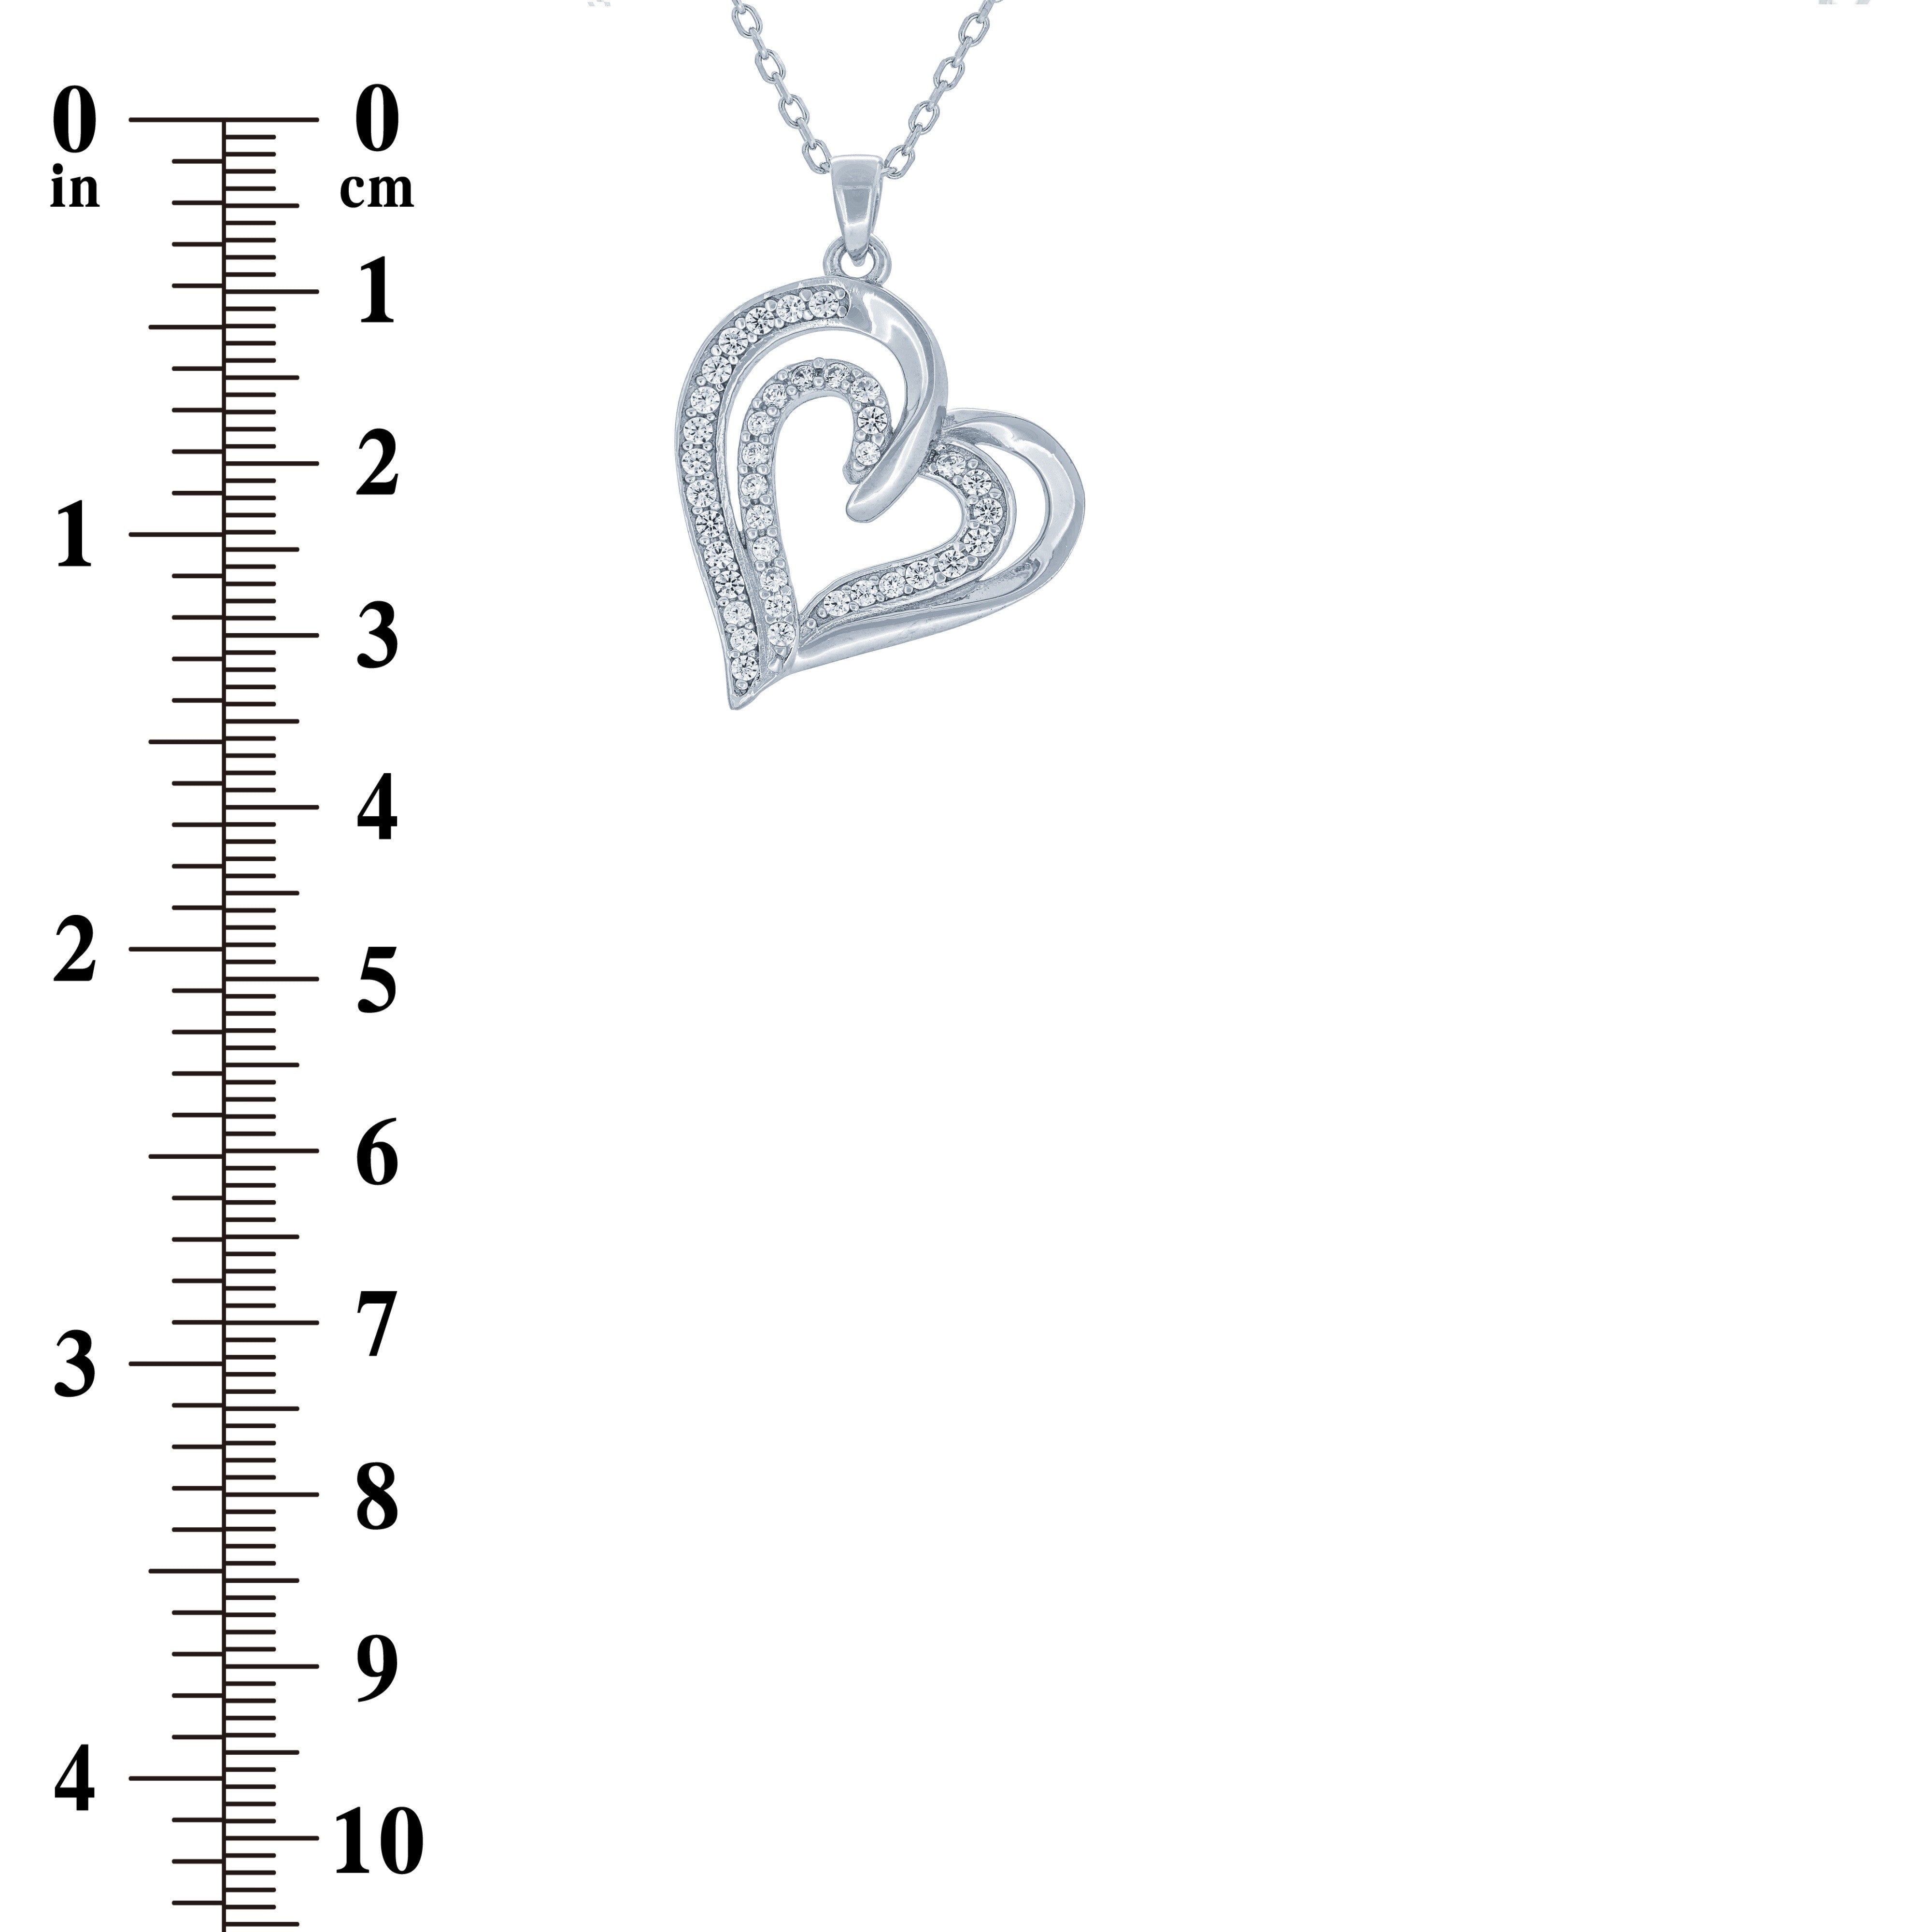 (100033) White Cubic Zirconia Heart Pendant Necklace In Sterling Silver